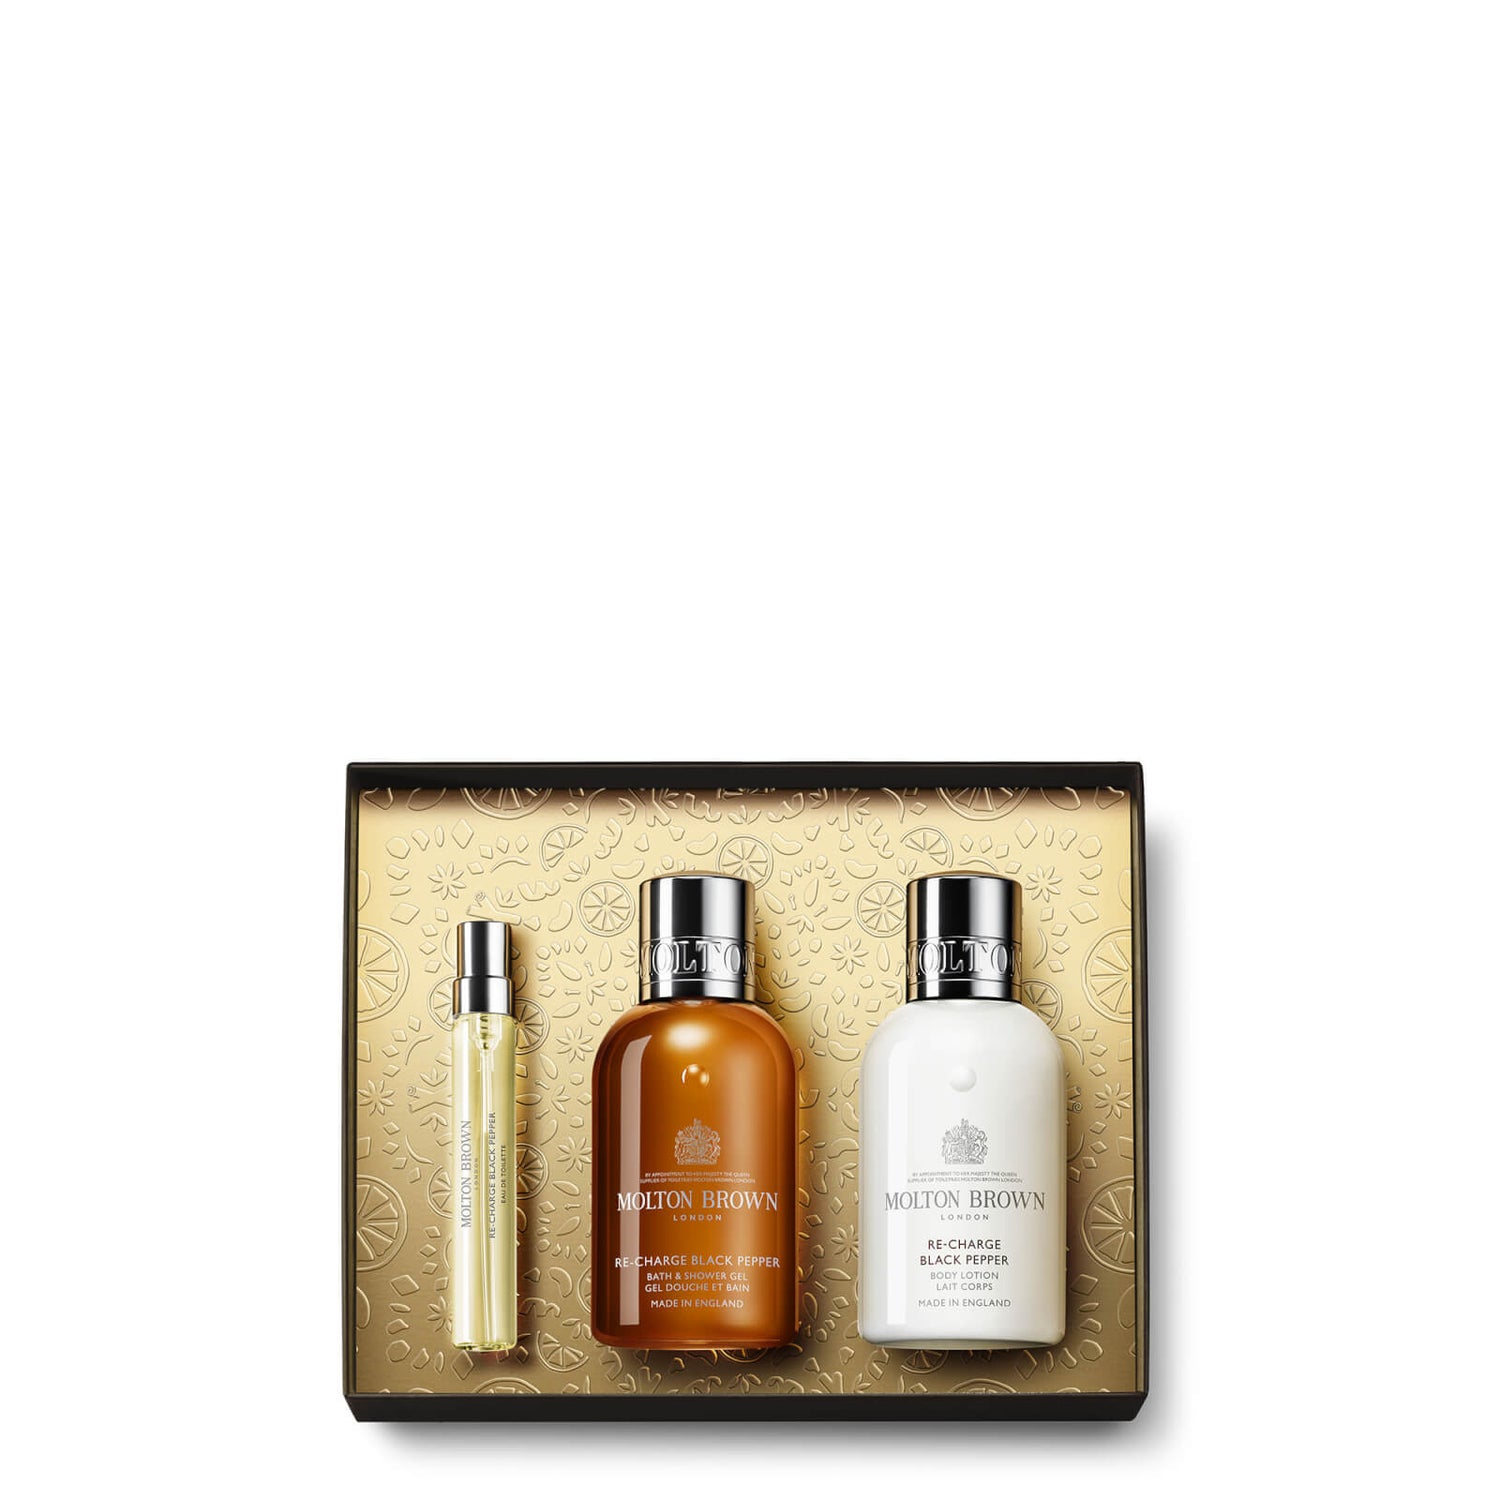 Molton Brown Re-charge Black Pepper Travel Gift Set (Worth £36.00)